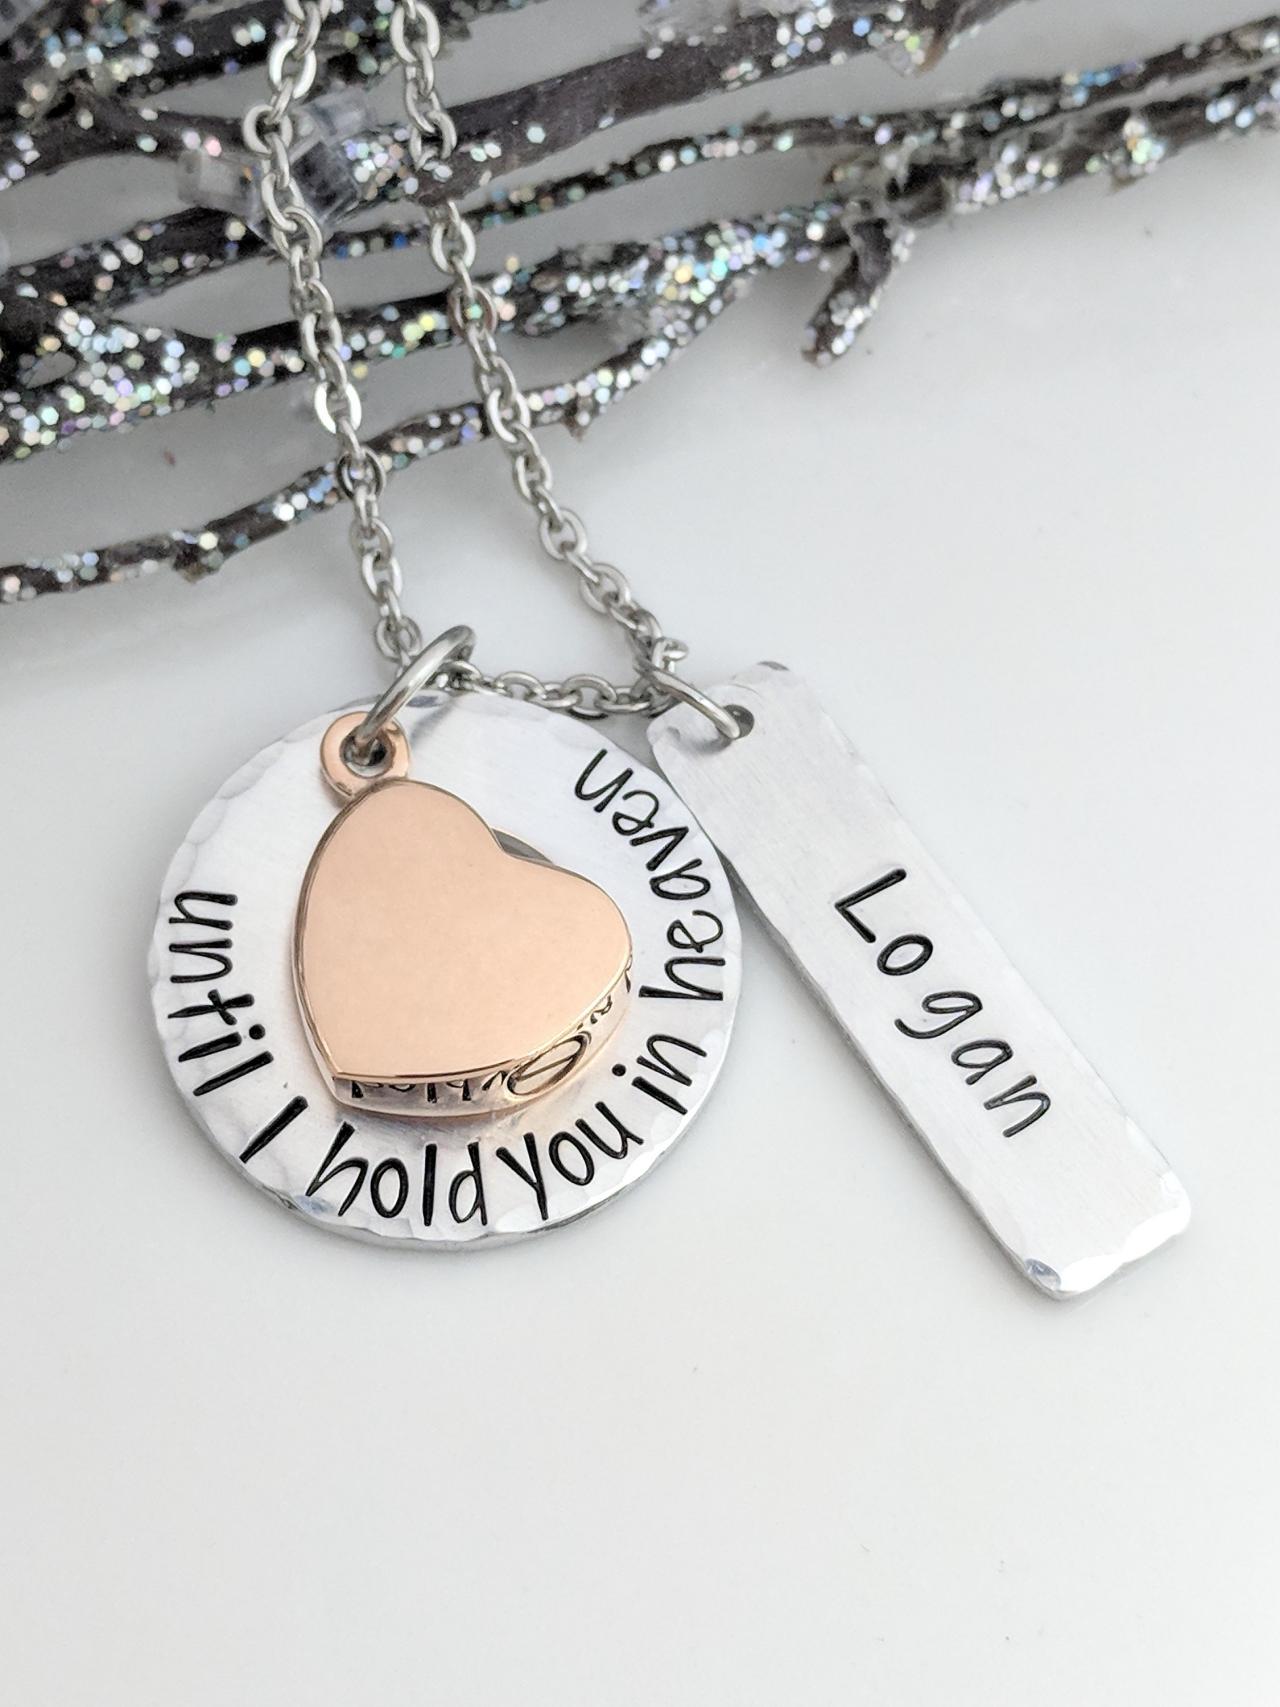 Memorial Jewelry - Sympathy Gift - In Memory Of Sympathy Gift - Urn Necklace - Cremation Urn - Remembrance Jewelry - Urn For Human Ashes